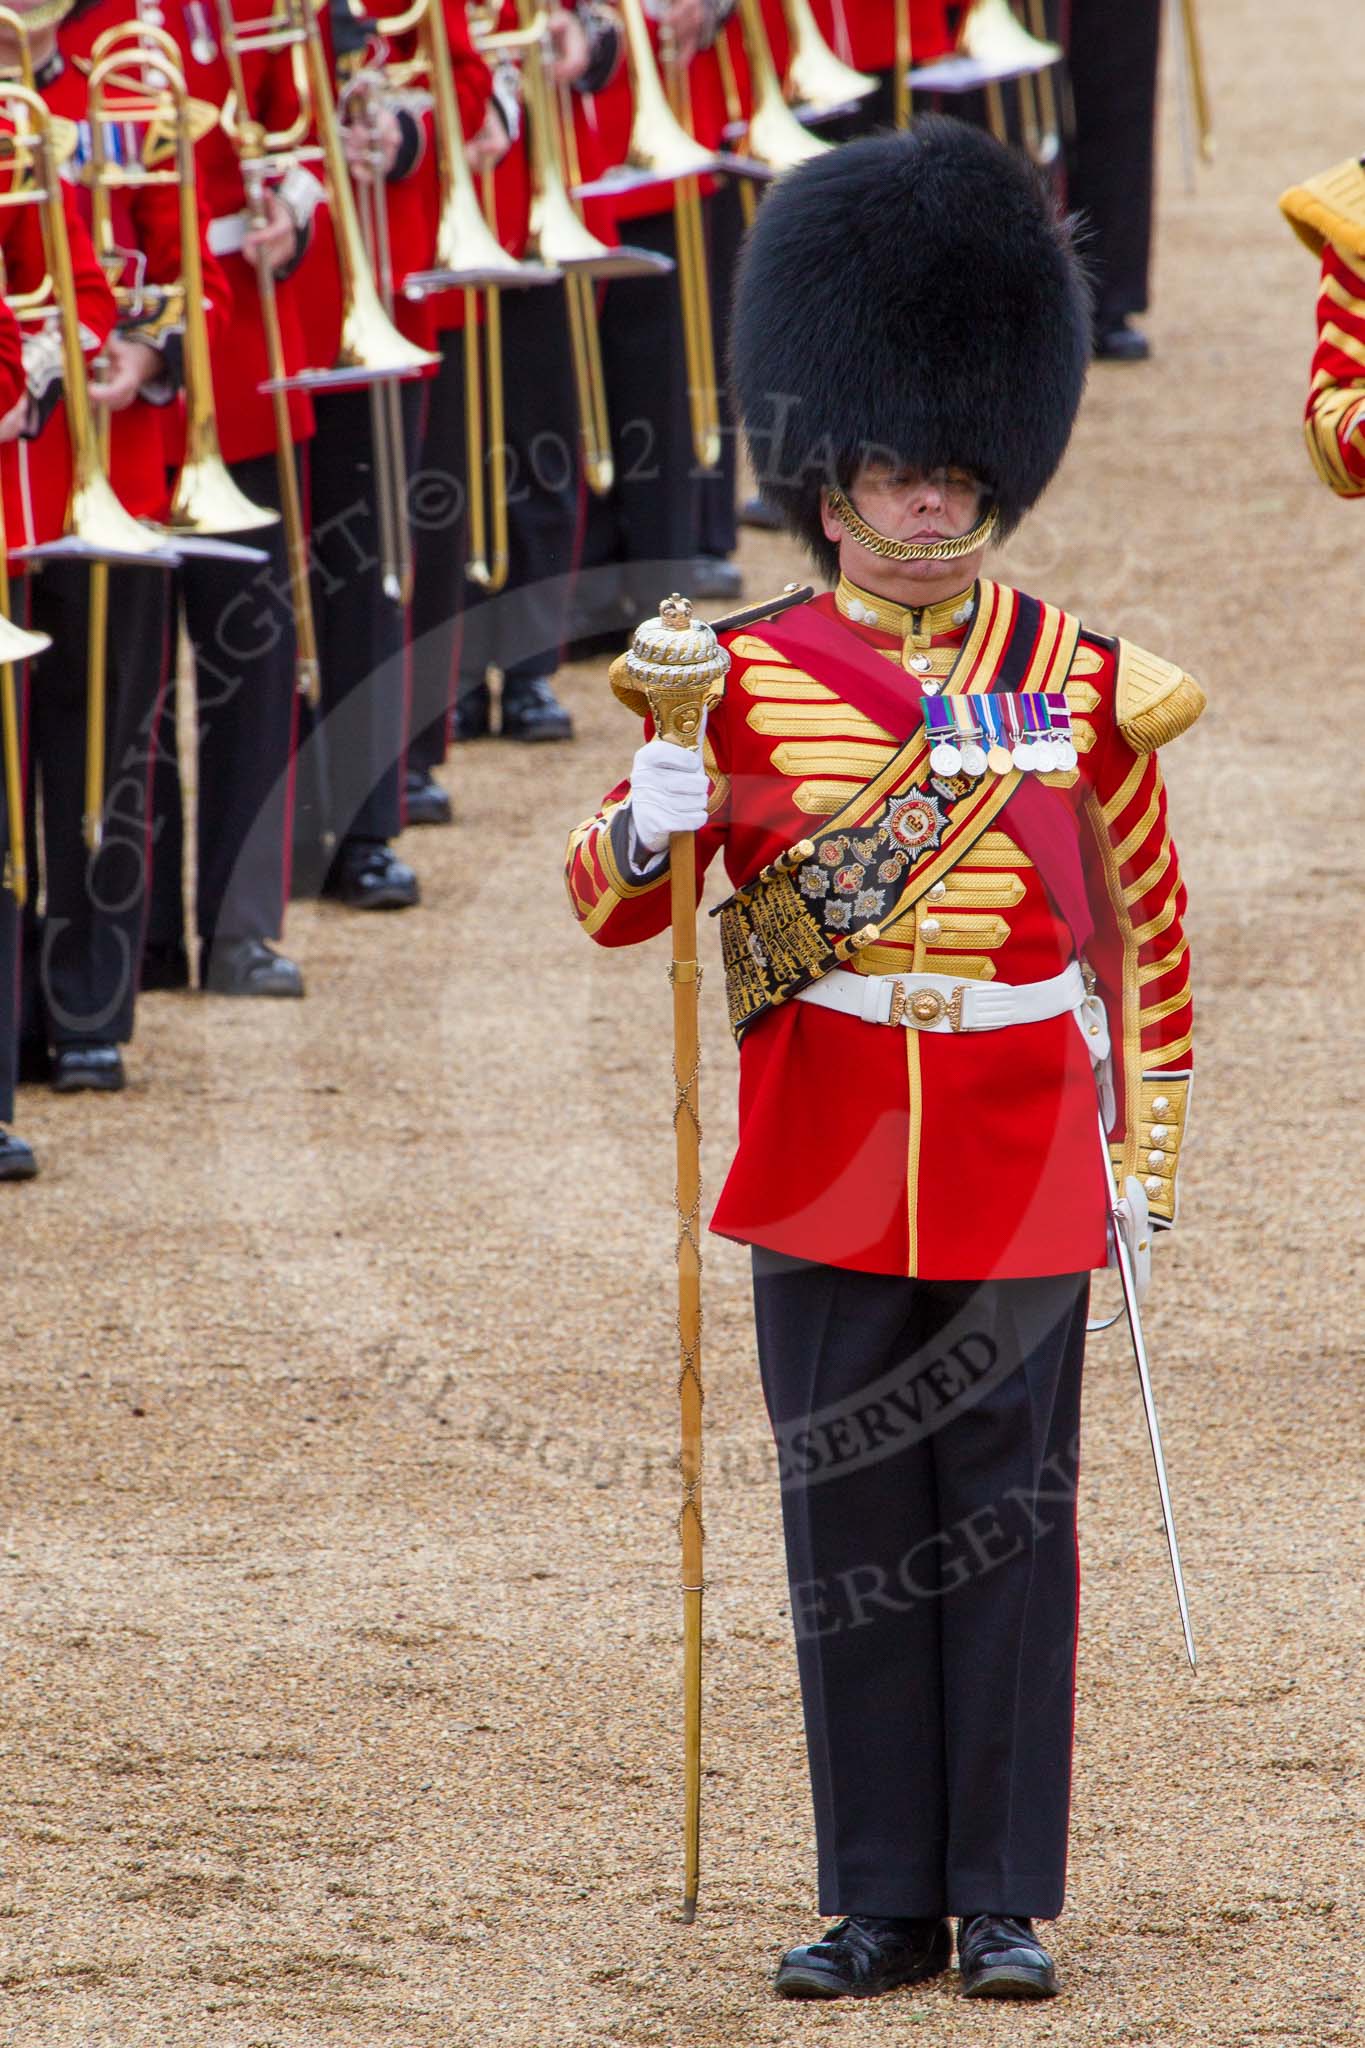 The Colonel's Review 2012: Drum Major Stephen Staite, Grenadier Guards..
Horse Guards Parade, Westminster,
London SW1,

United Kingdom,
on 09 June 2012 at 11:50, image #378